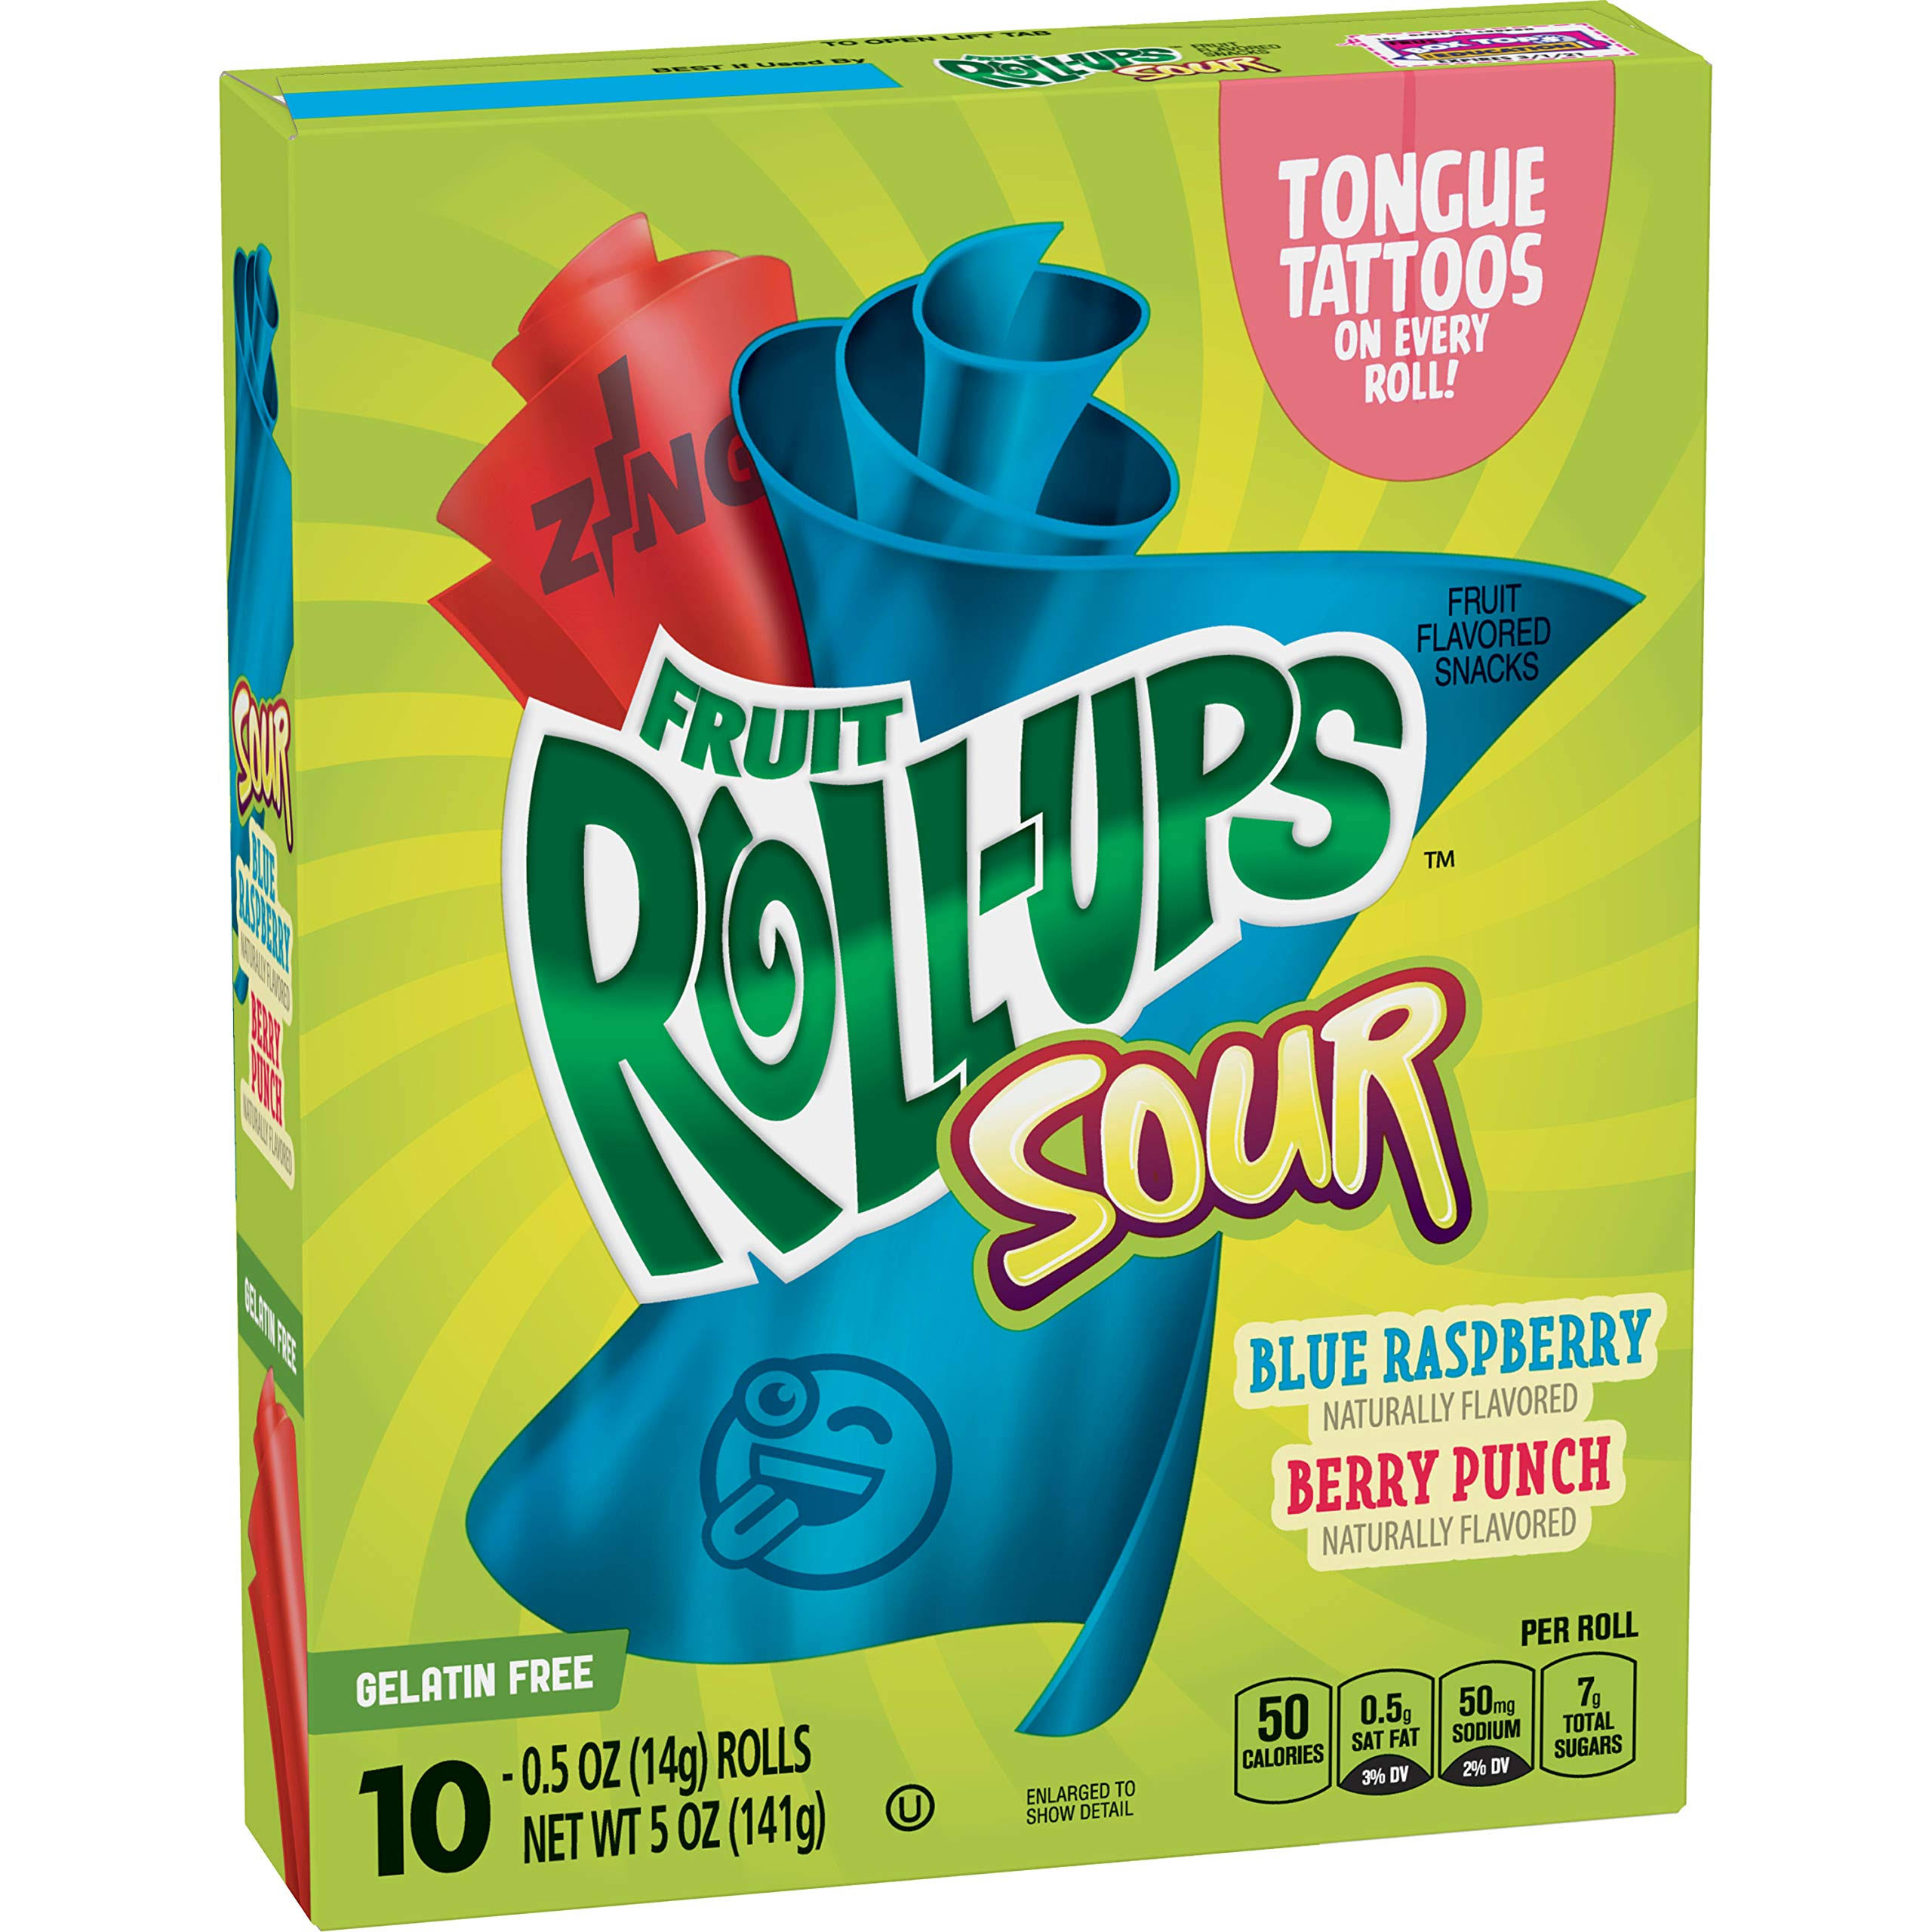 Fruit Roll-Ups Fruit Flavored Snacks, Blue Raspberry/Berry Punch, Sour, 10 Pack - 10 pack, 0.5 oz rolls